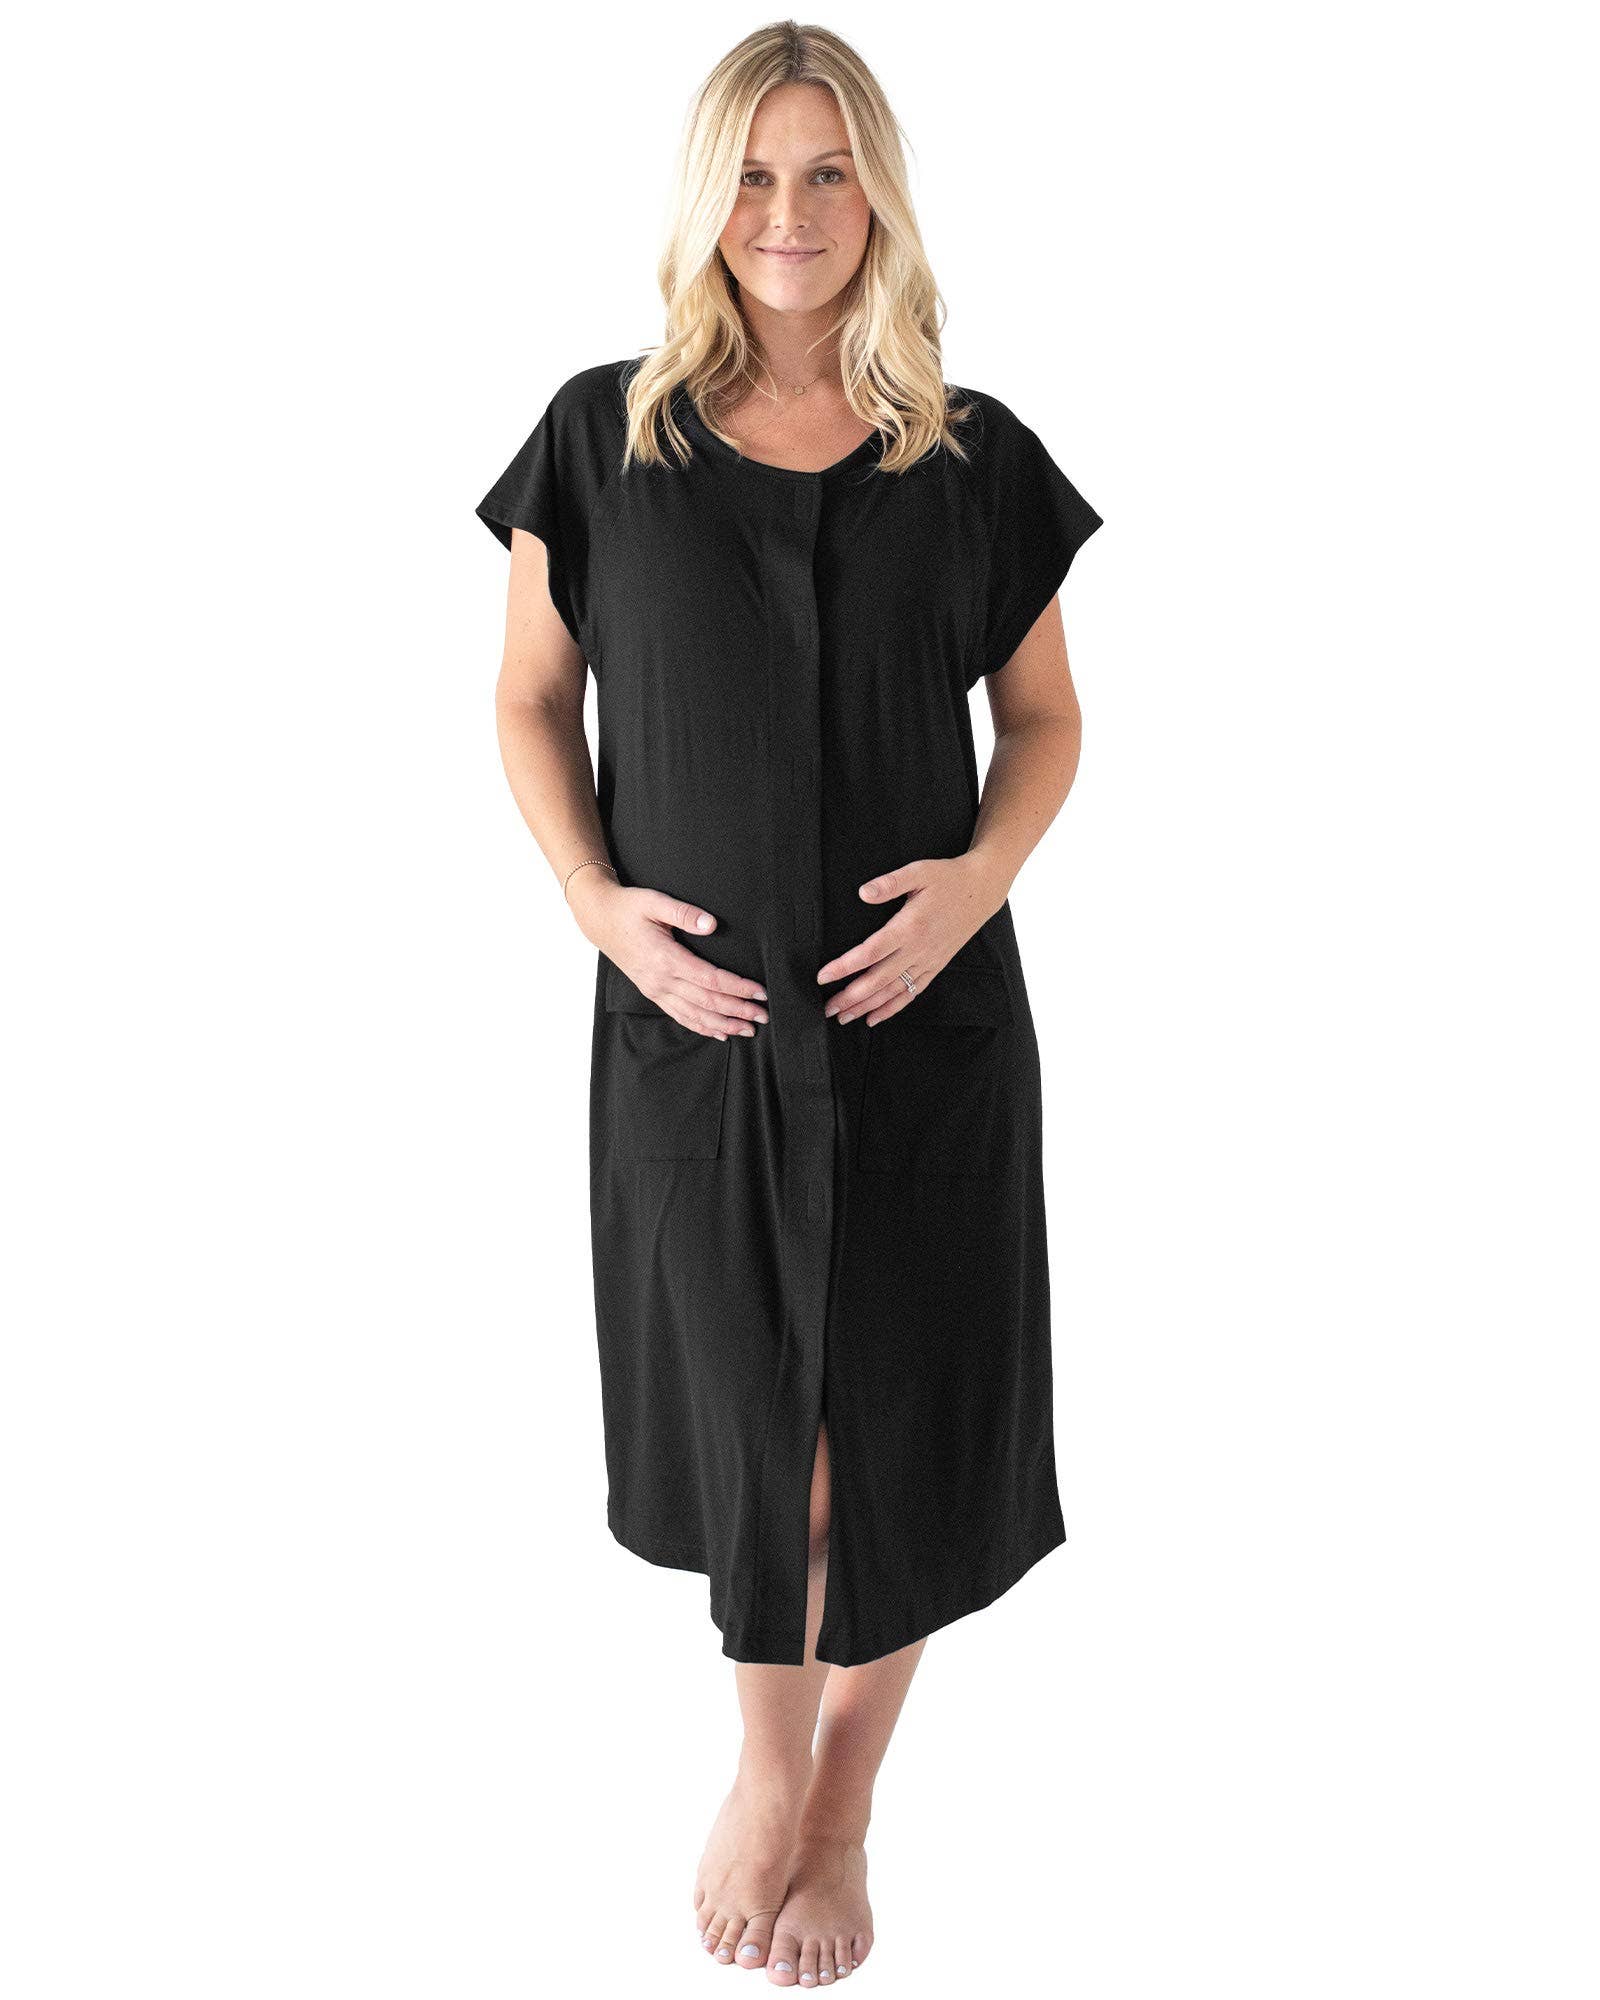 Kindred Bravely - 3 In 1 Universal Labor, Delivery & Nursing Gown Rose –  Classy Rascals Boutique